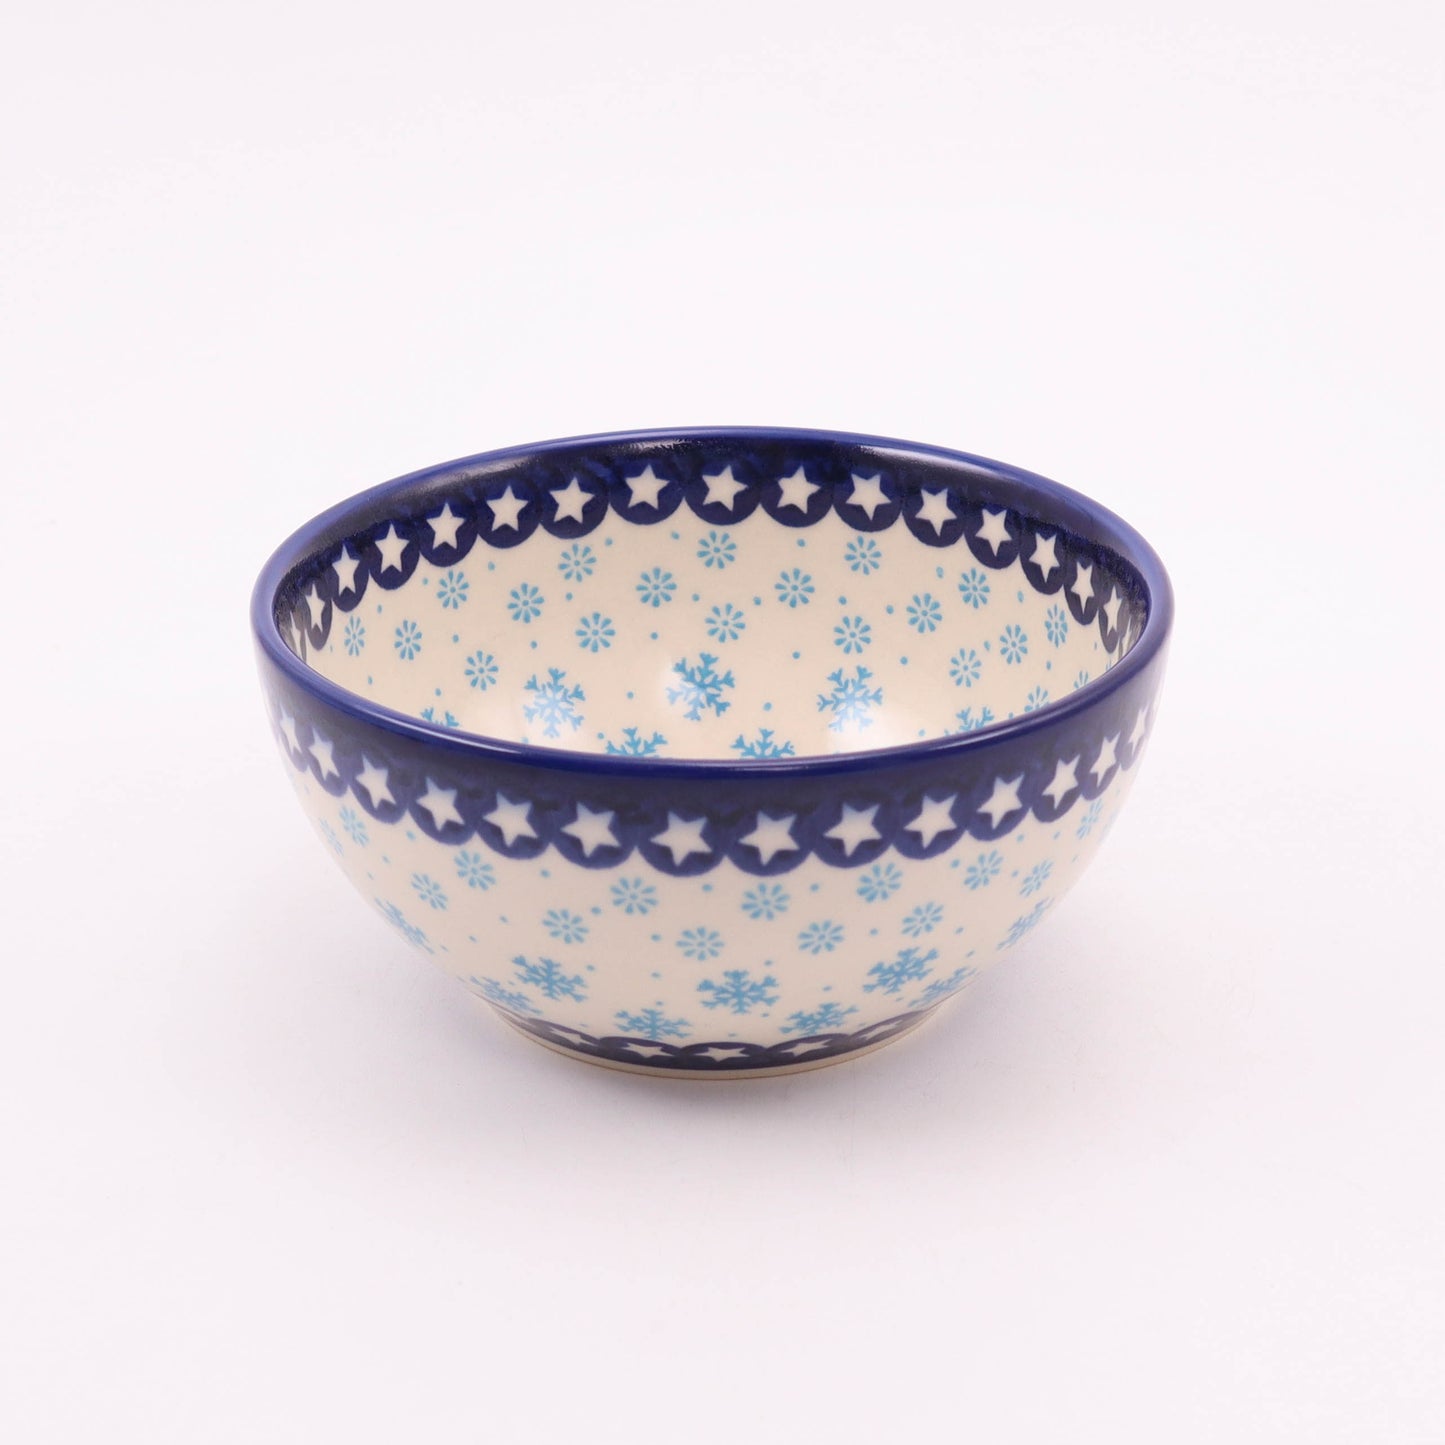 6" Cereal Bowl. Pattern: Frosted Flakes